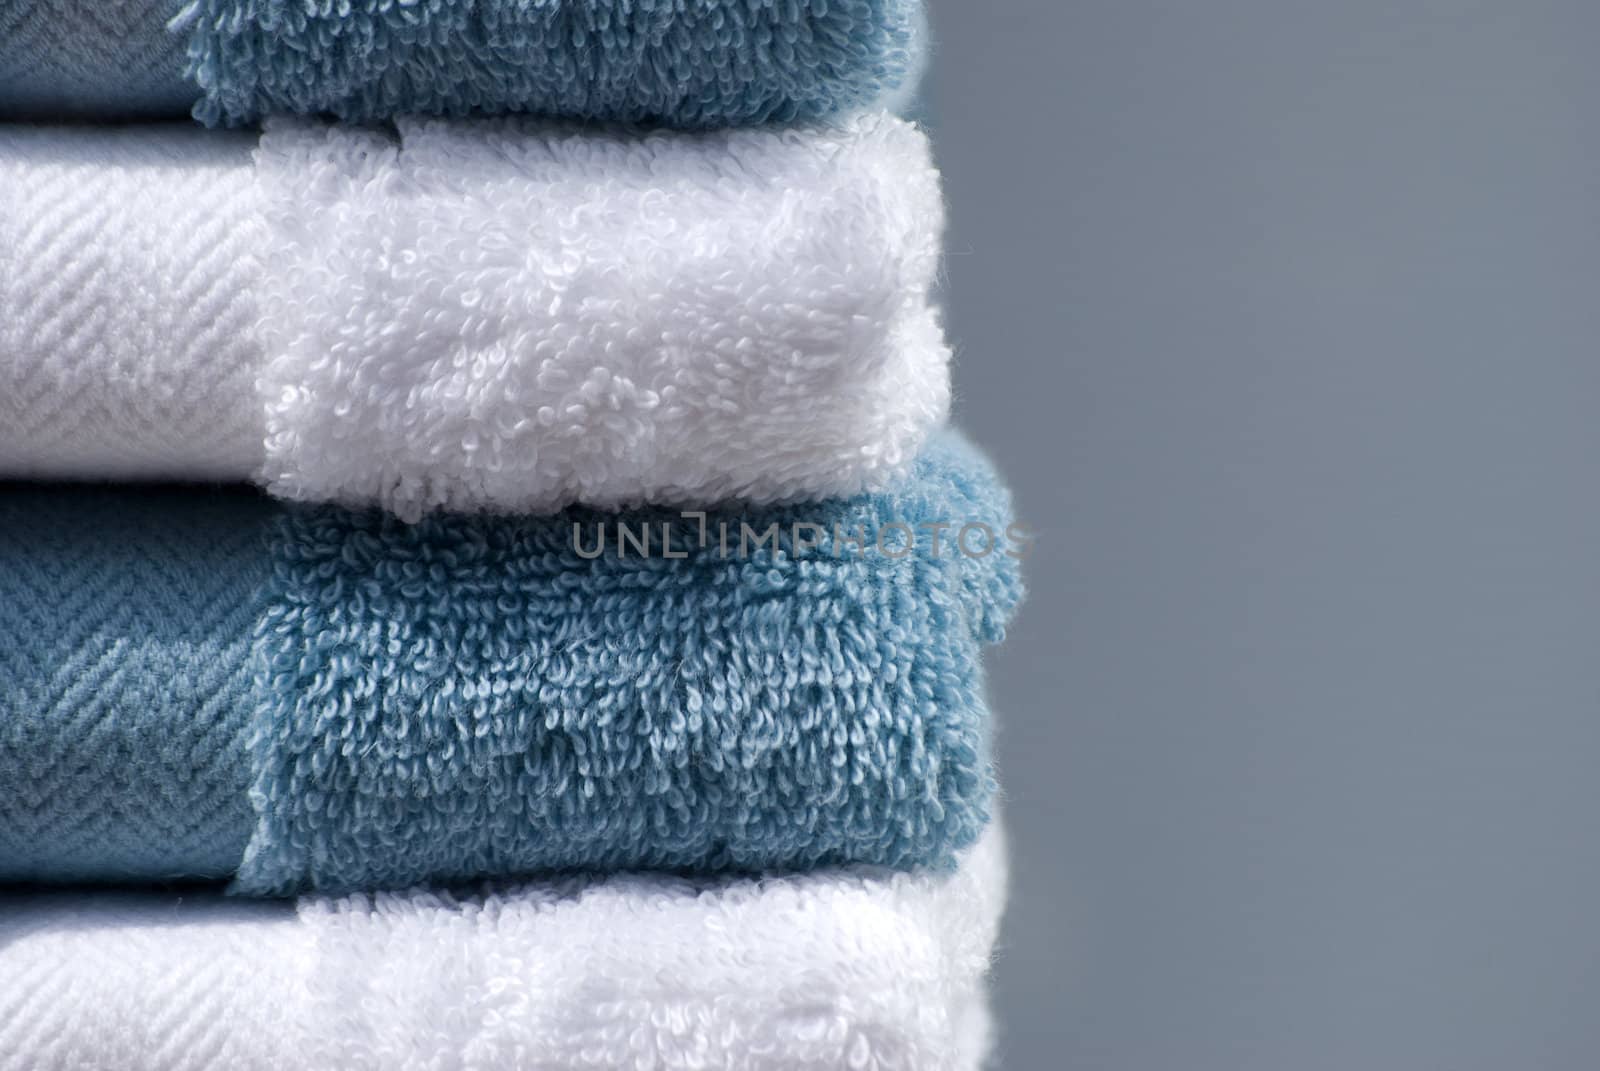 Blue and white cotton towels on plain background